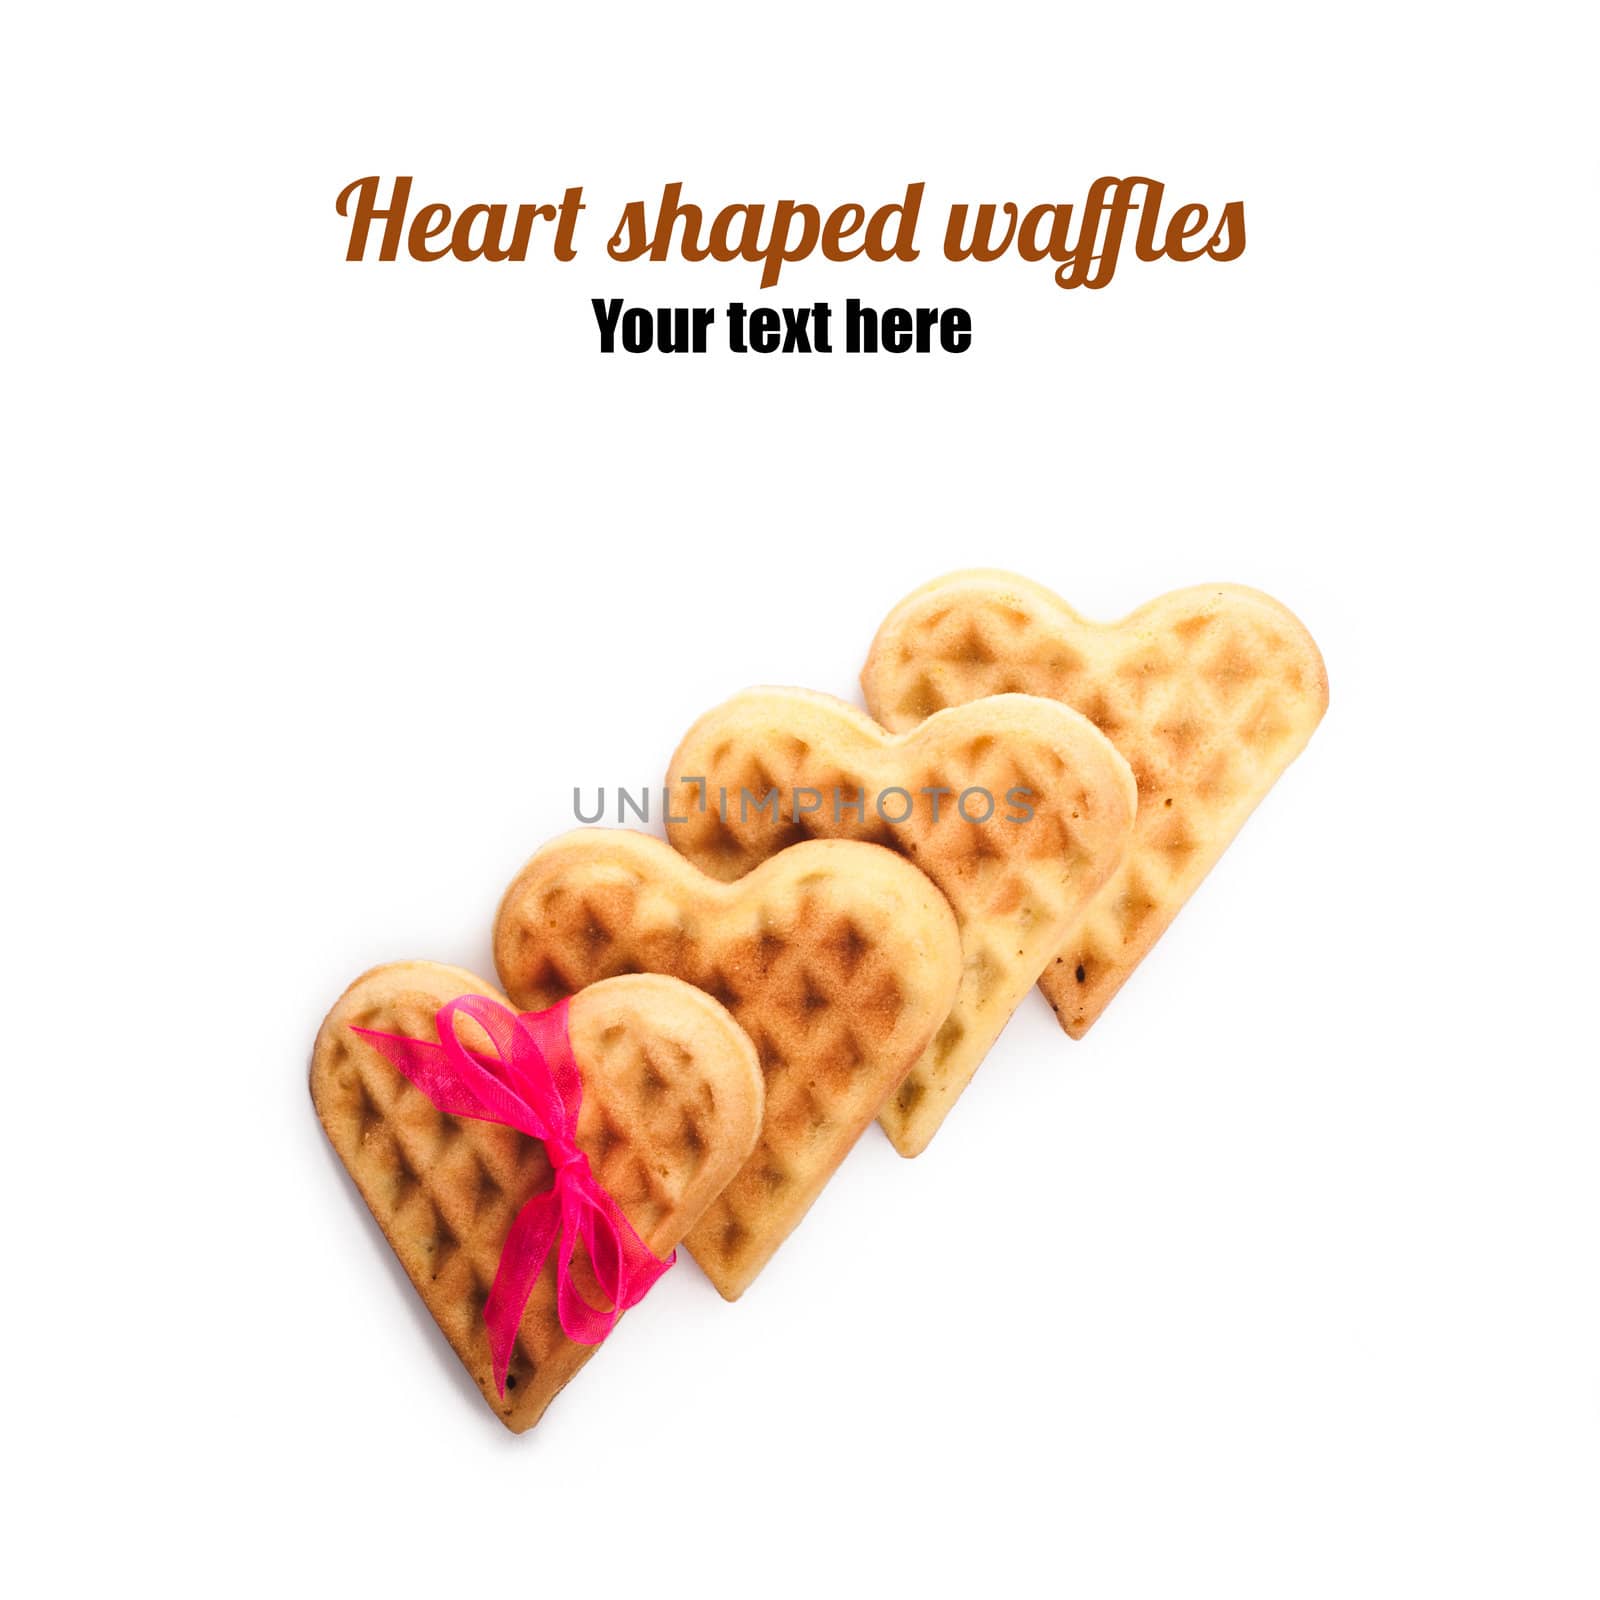 Heart shaped waffles with pink ribbon by nvelichko